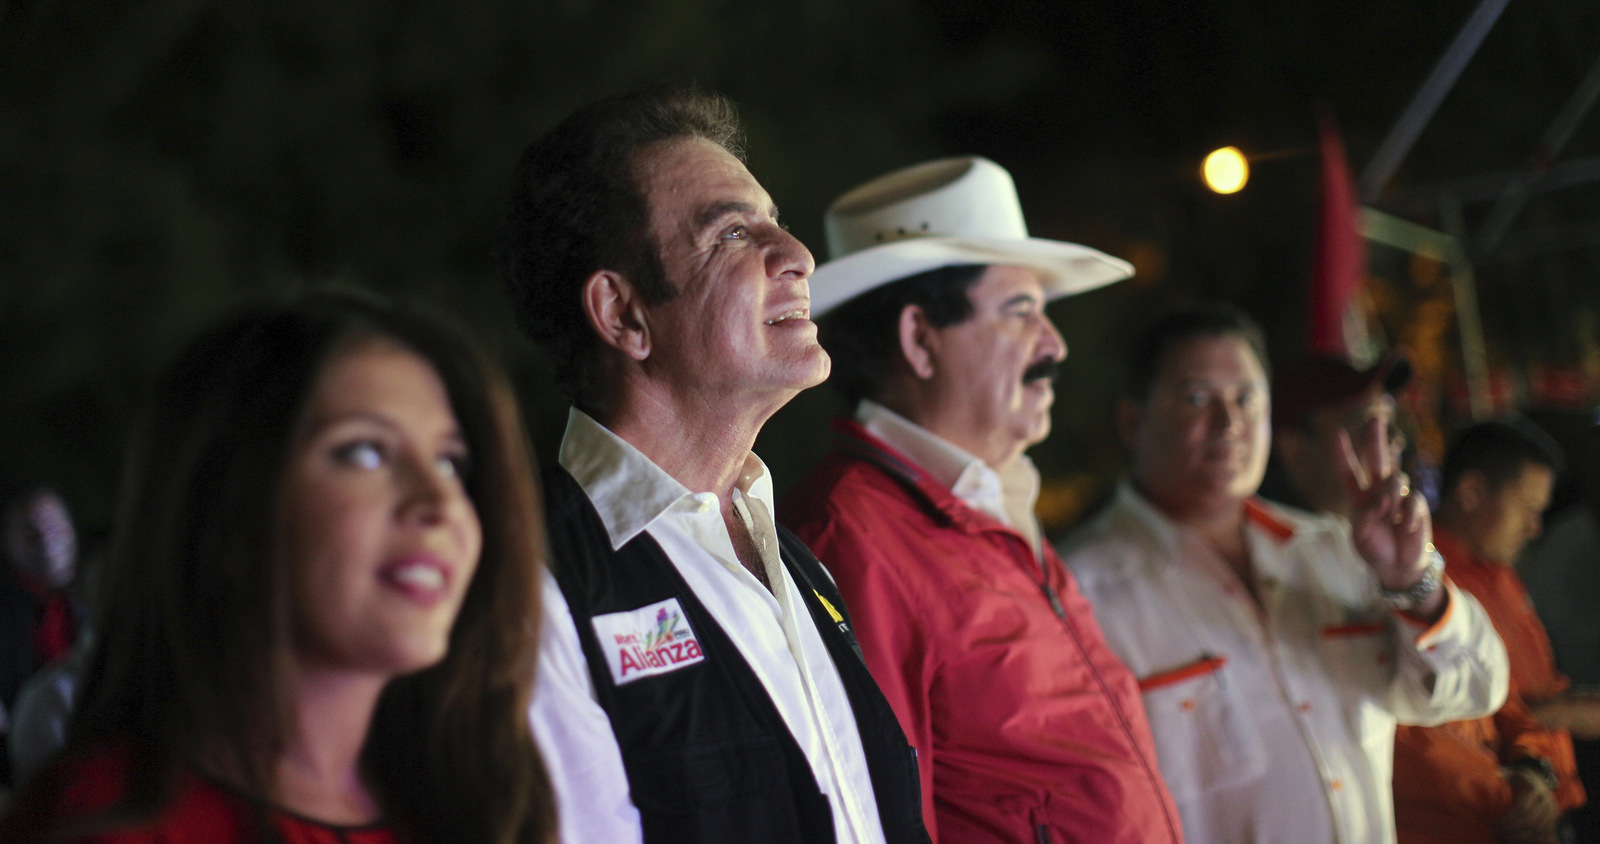 Opposition Alliance presidential candidate Salvador Nasralla, center left, and former President Manuel Zelaya, center right, attend a closing campaign rally in Tegucigalpa, Honduras, Nov. 20, 2017. Zelaya was ousted from the presidency in a US-backed coup in 2009. (AP/Rodrigo Abd)